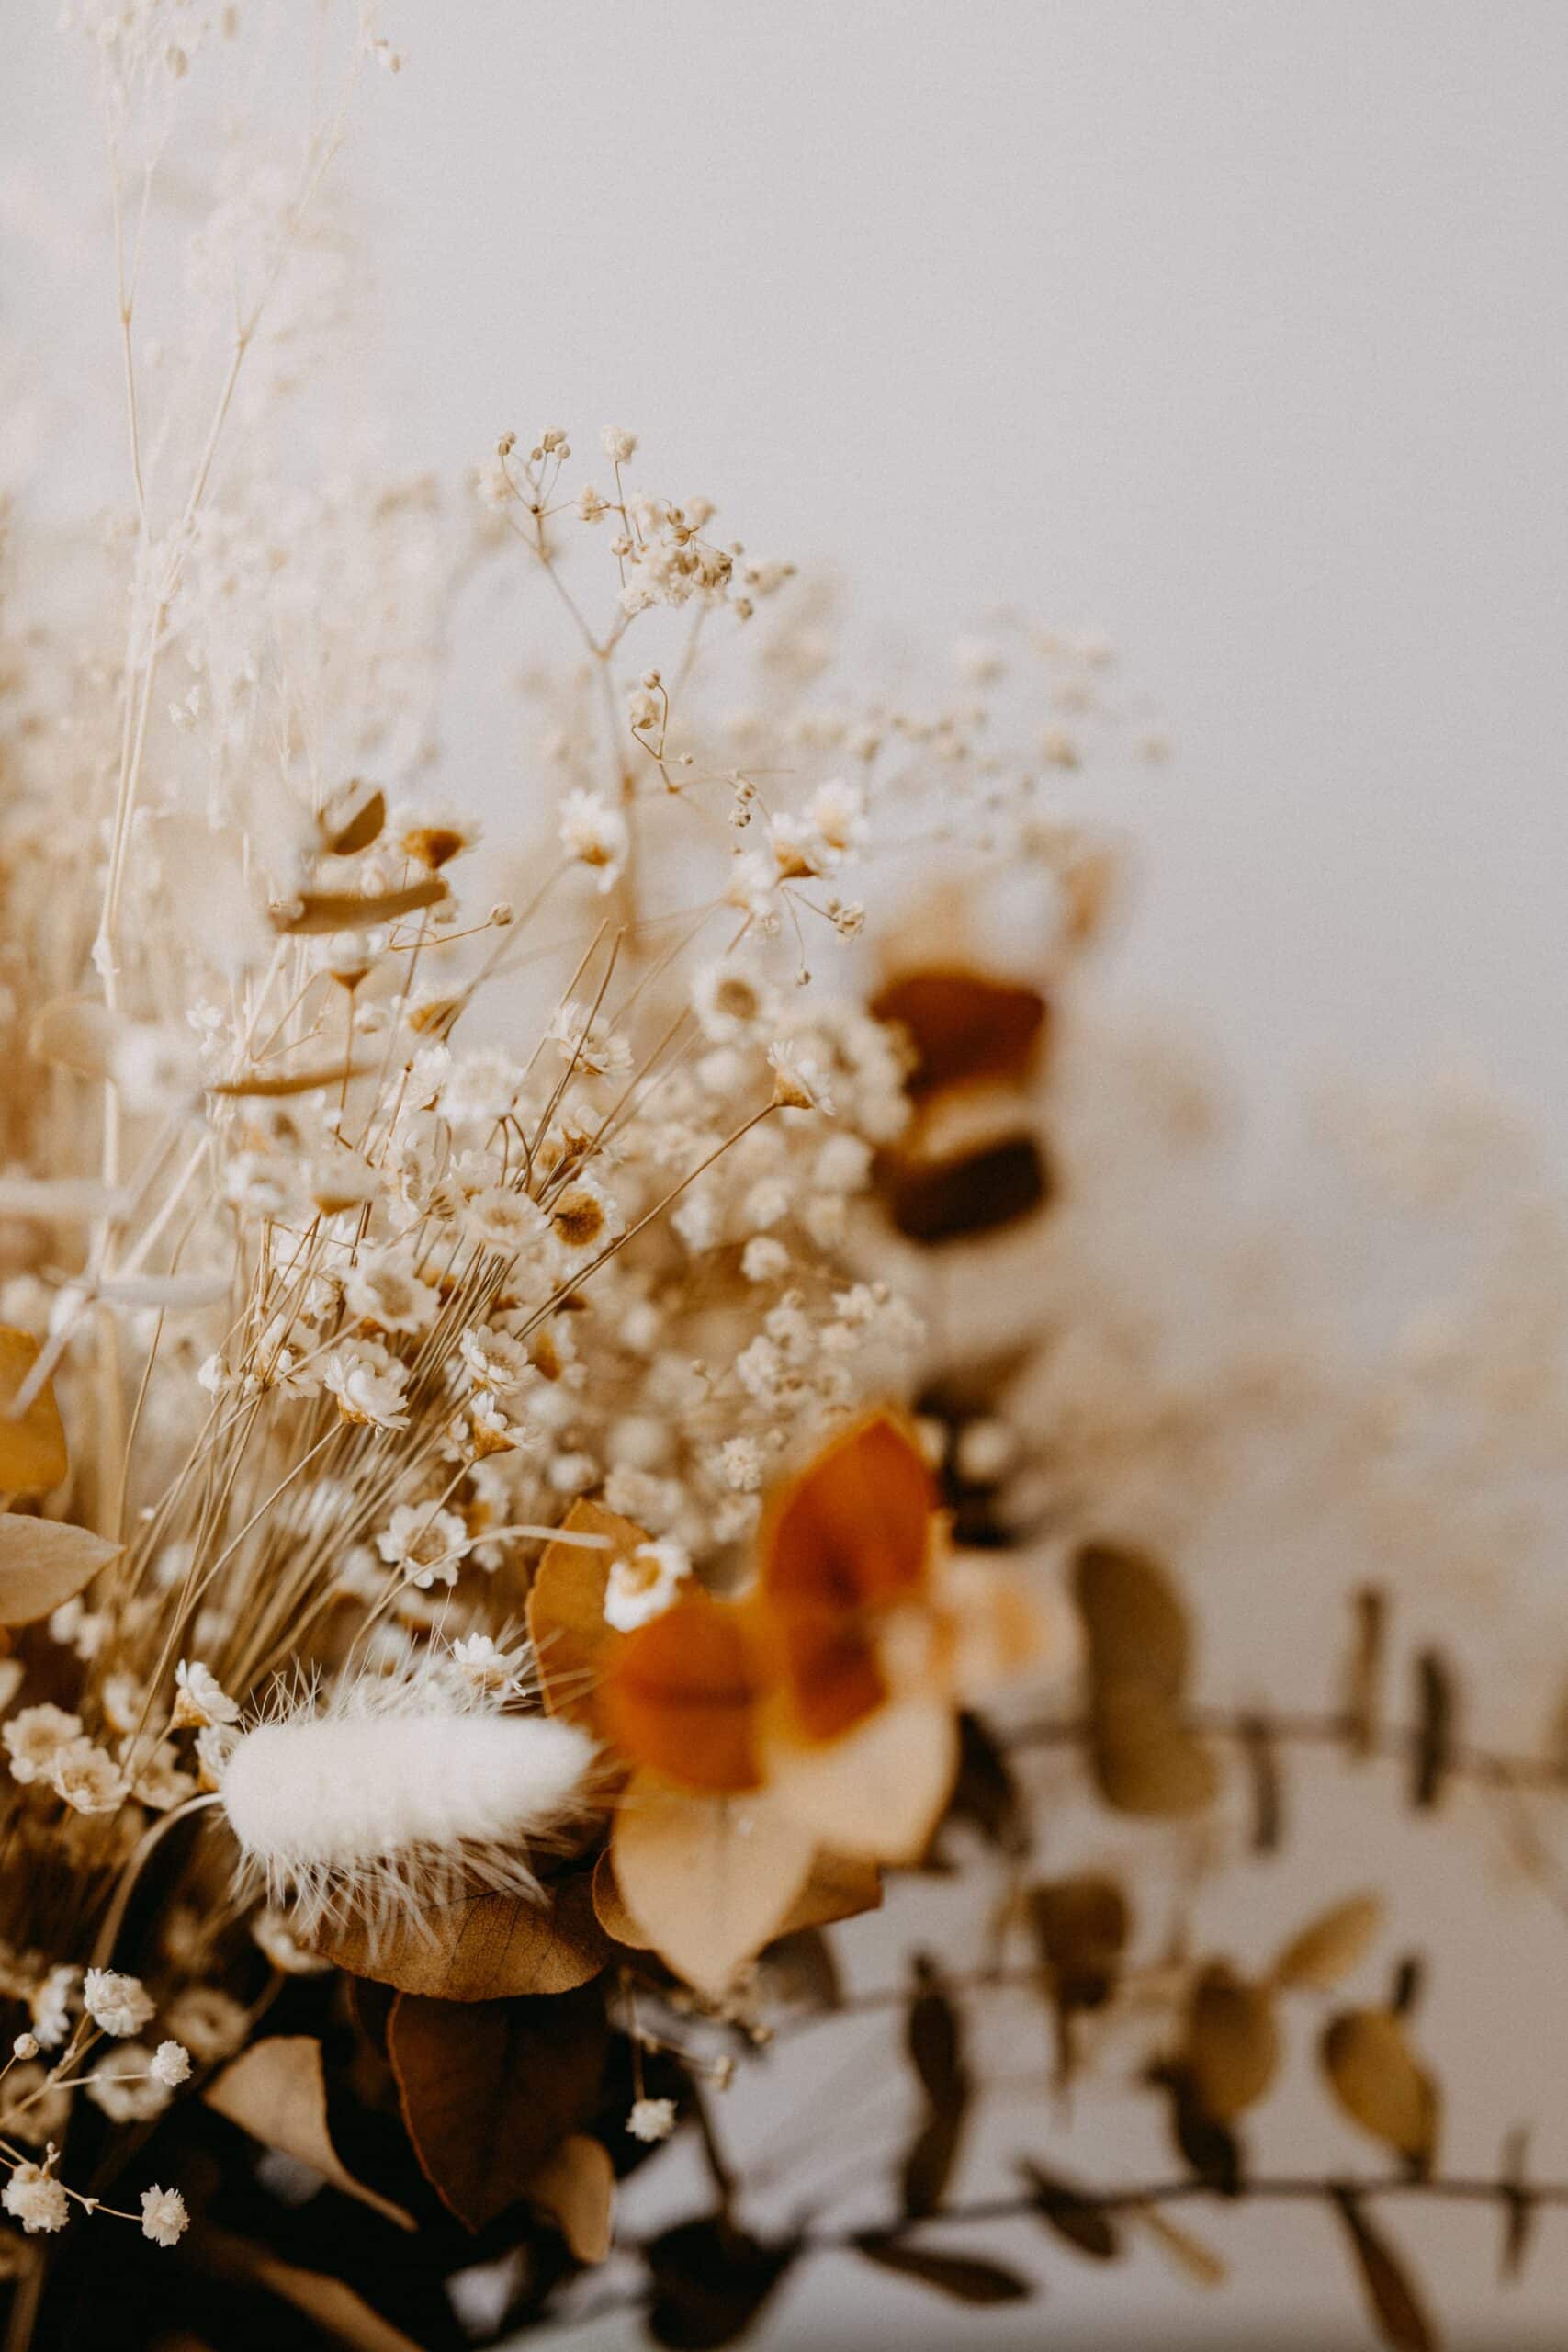 Dried Flowers Business Trend Article Image